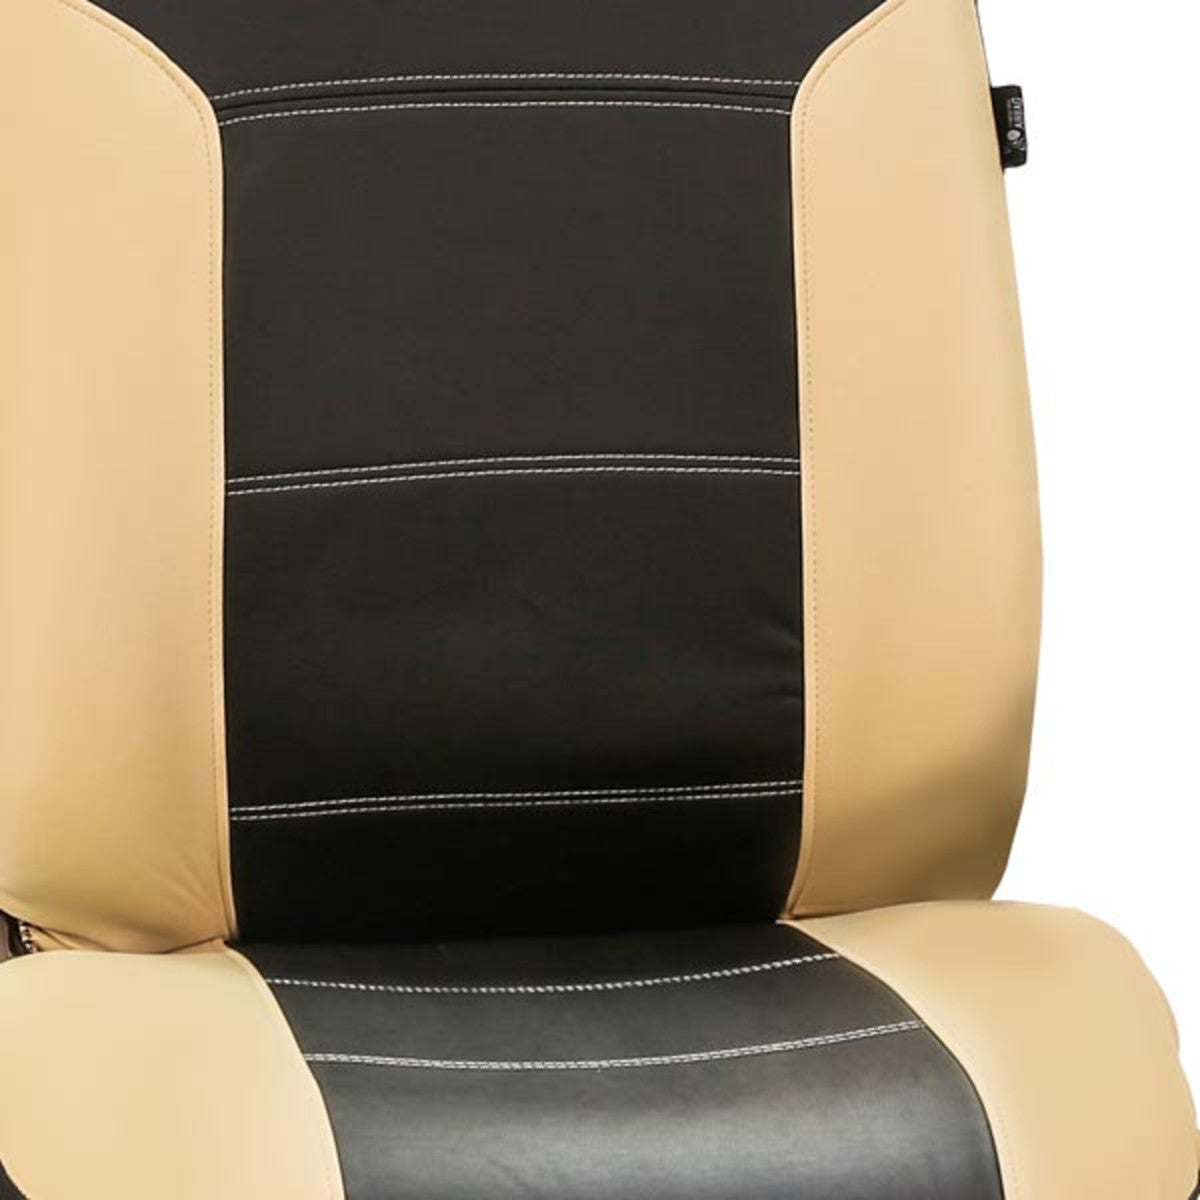 Royal PU Leather Seat Covers - Front Set Beige / Black